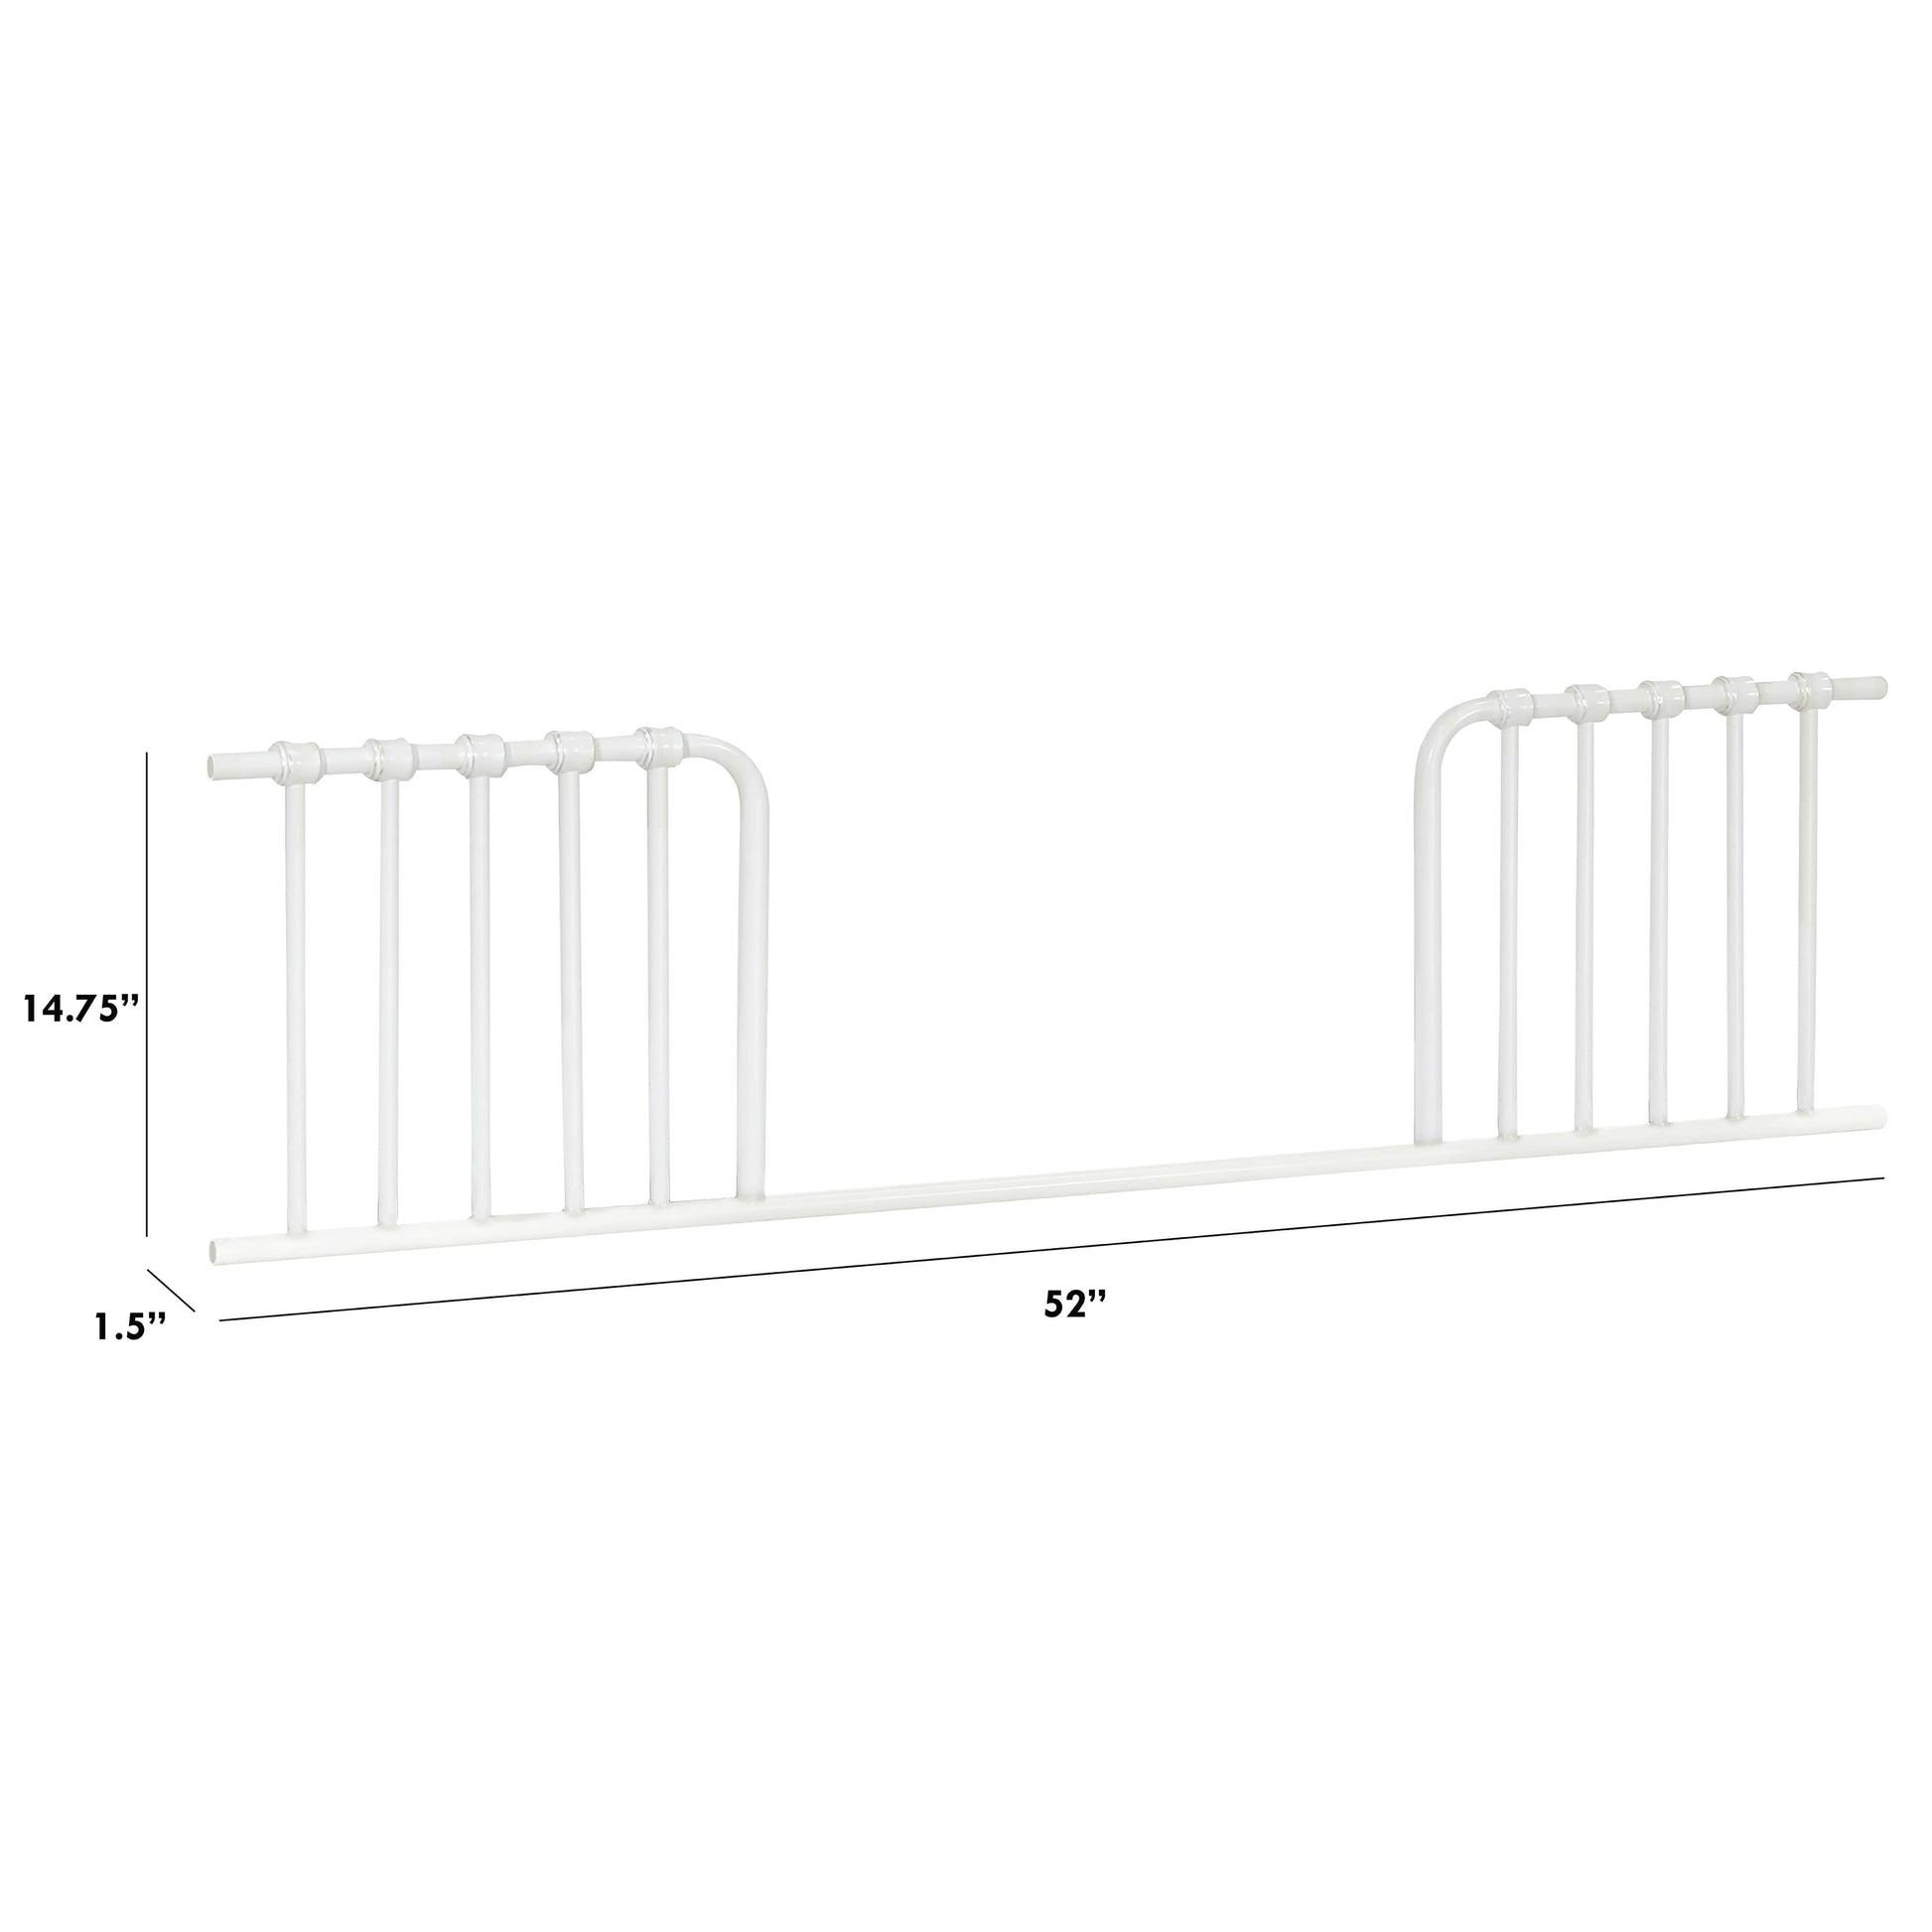 B15599WX,Toddler Bed Conversion Kit for Abigail and Winston in Washed White